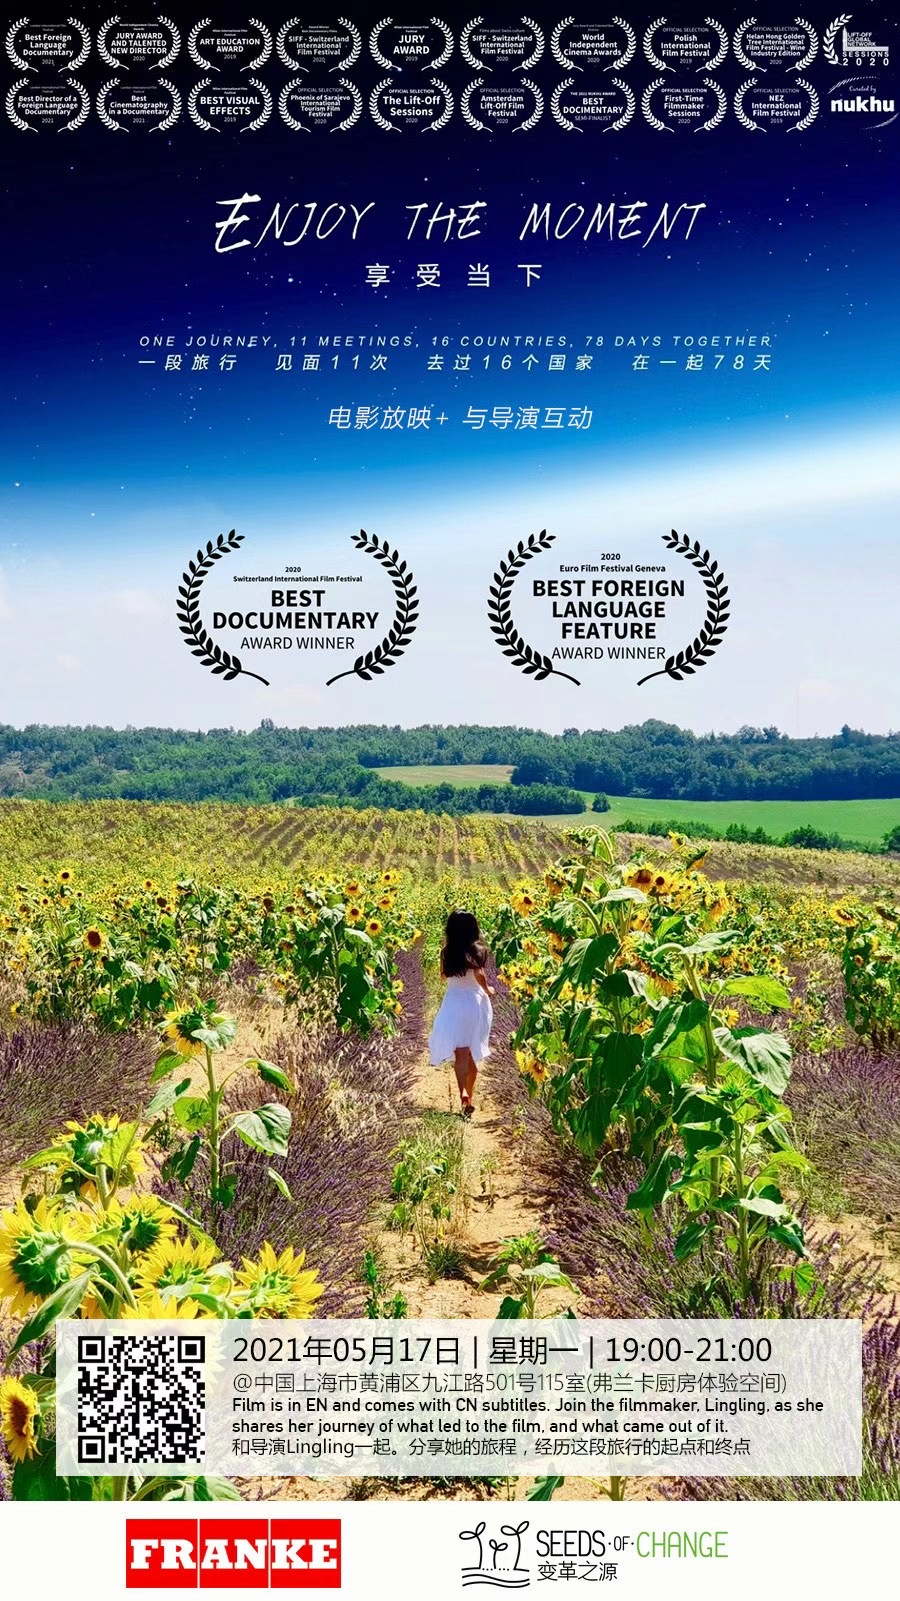 Enjoy the Moment: Film Screening + Discussion with the Filmmaker| Shanghai Events